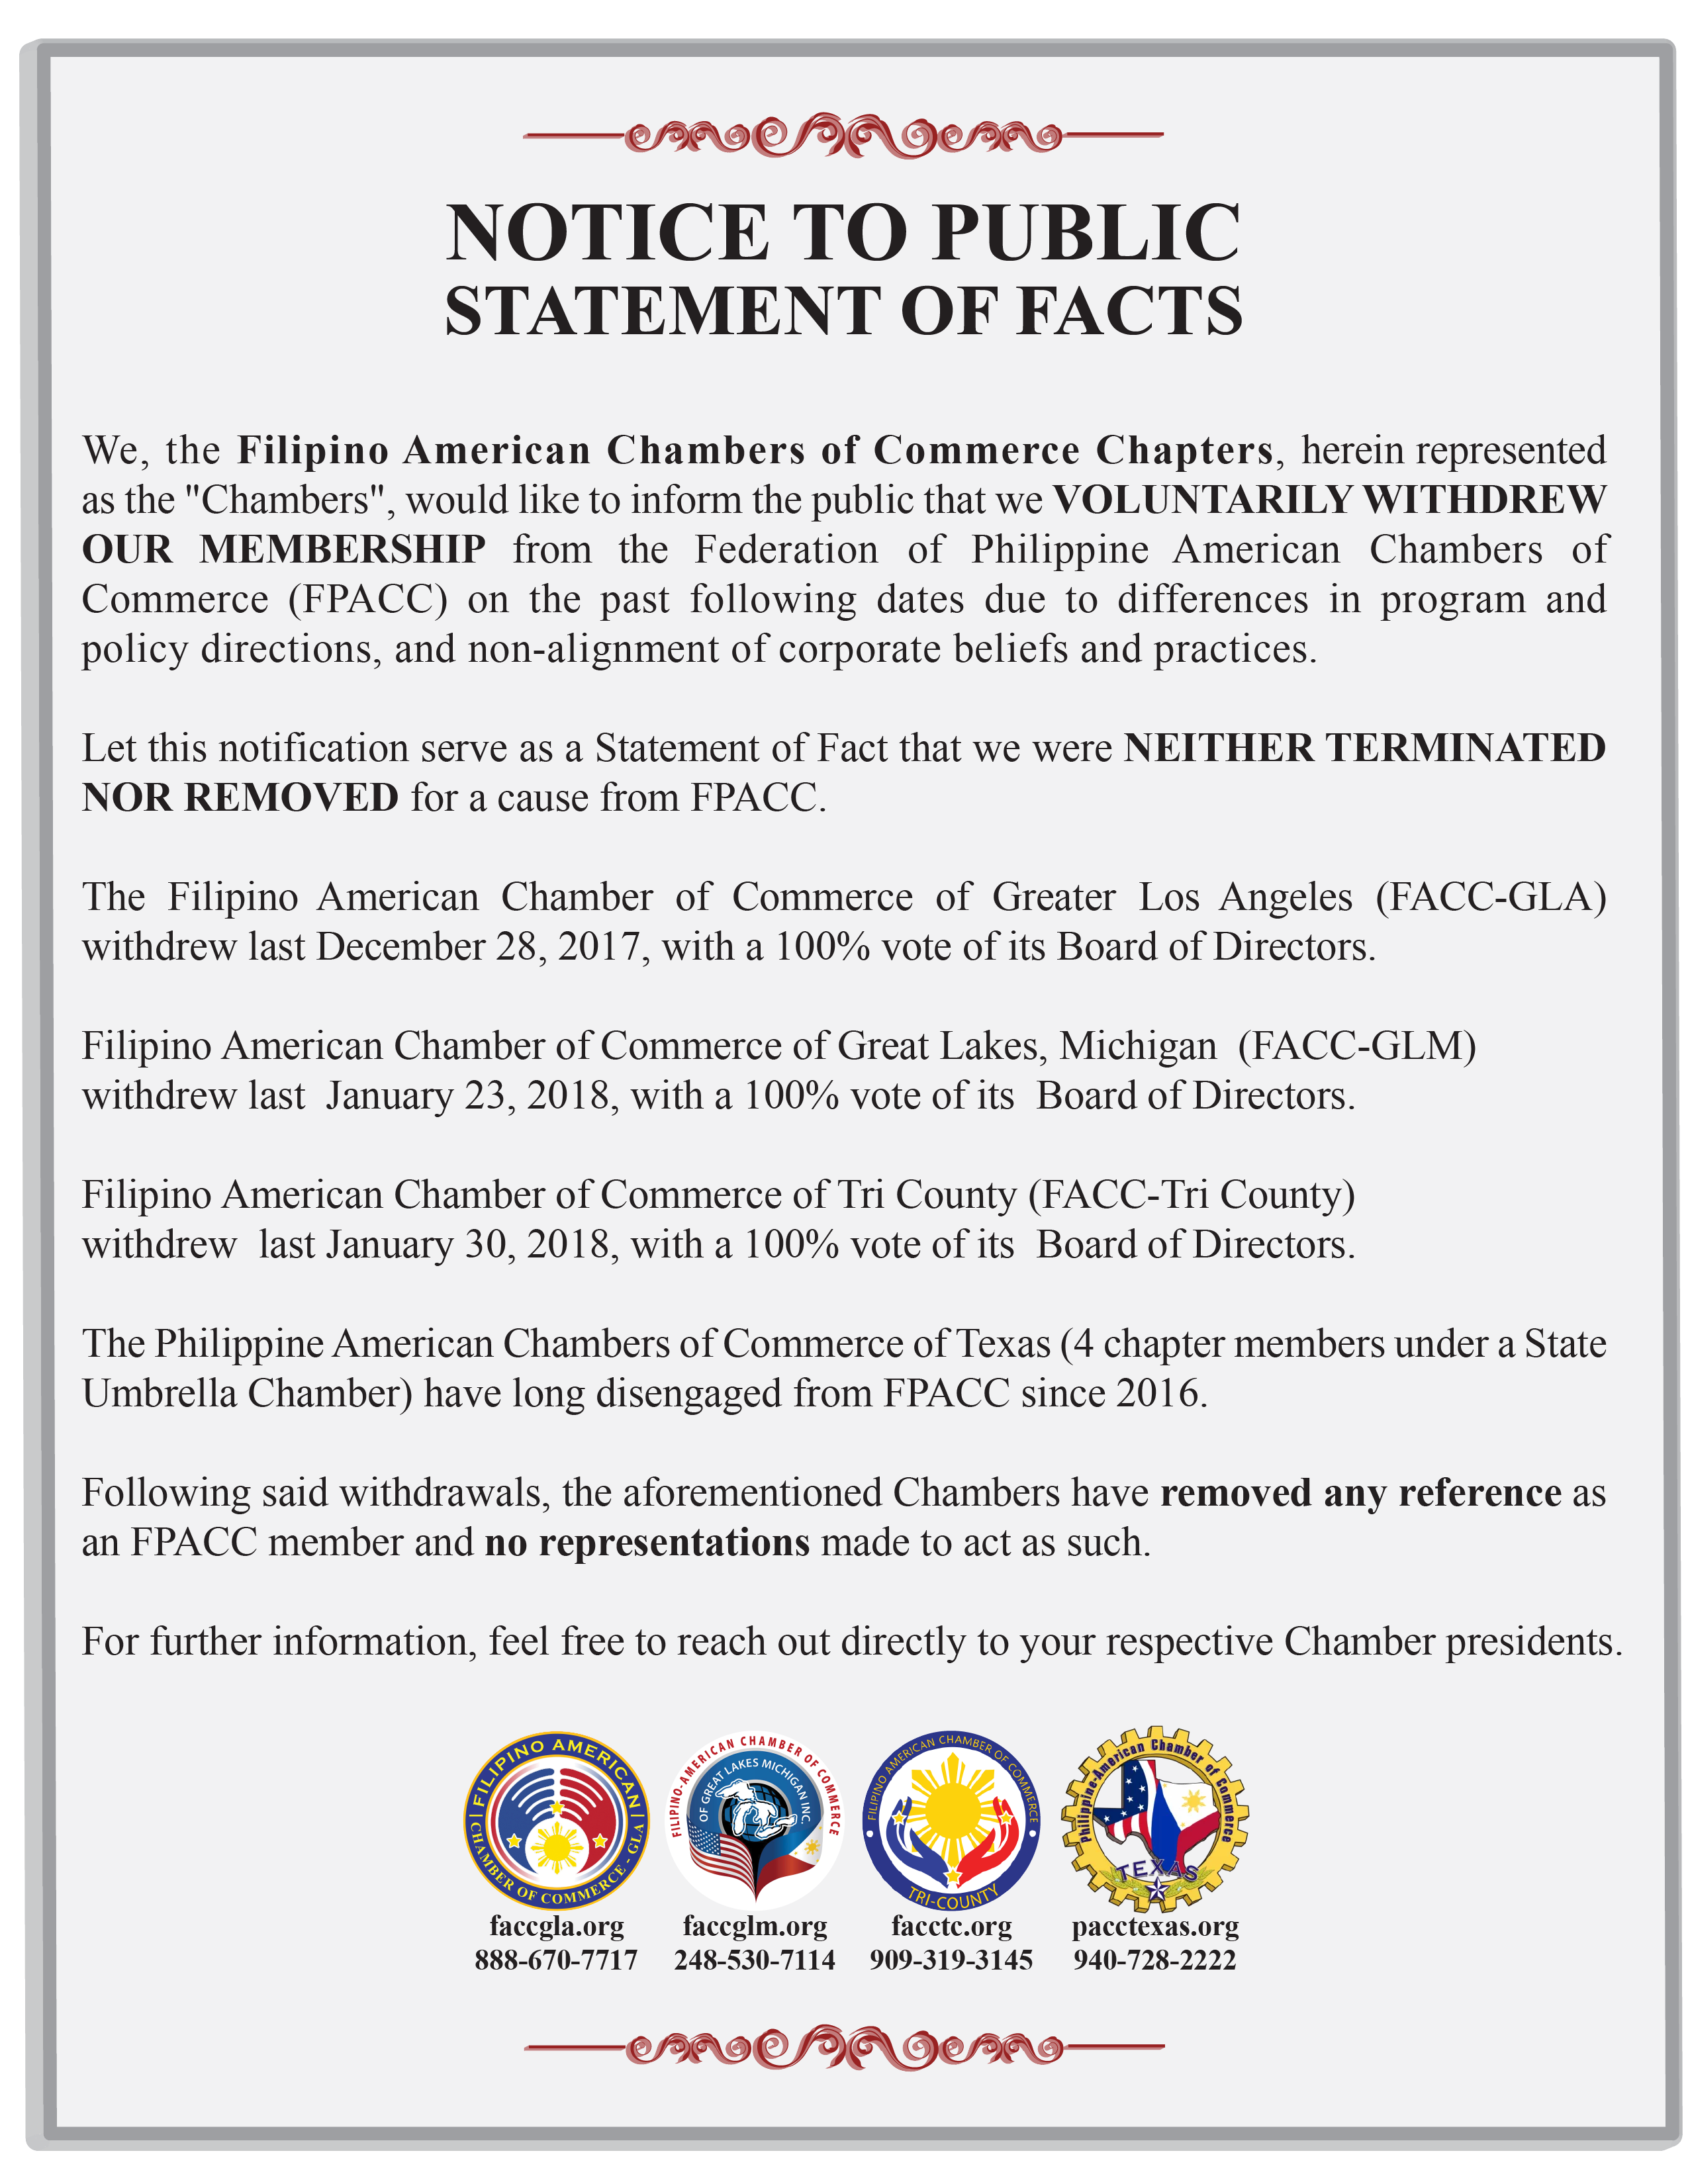 PSA: Notice To Public Statement of Facts